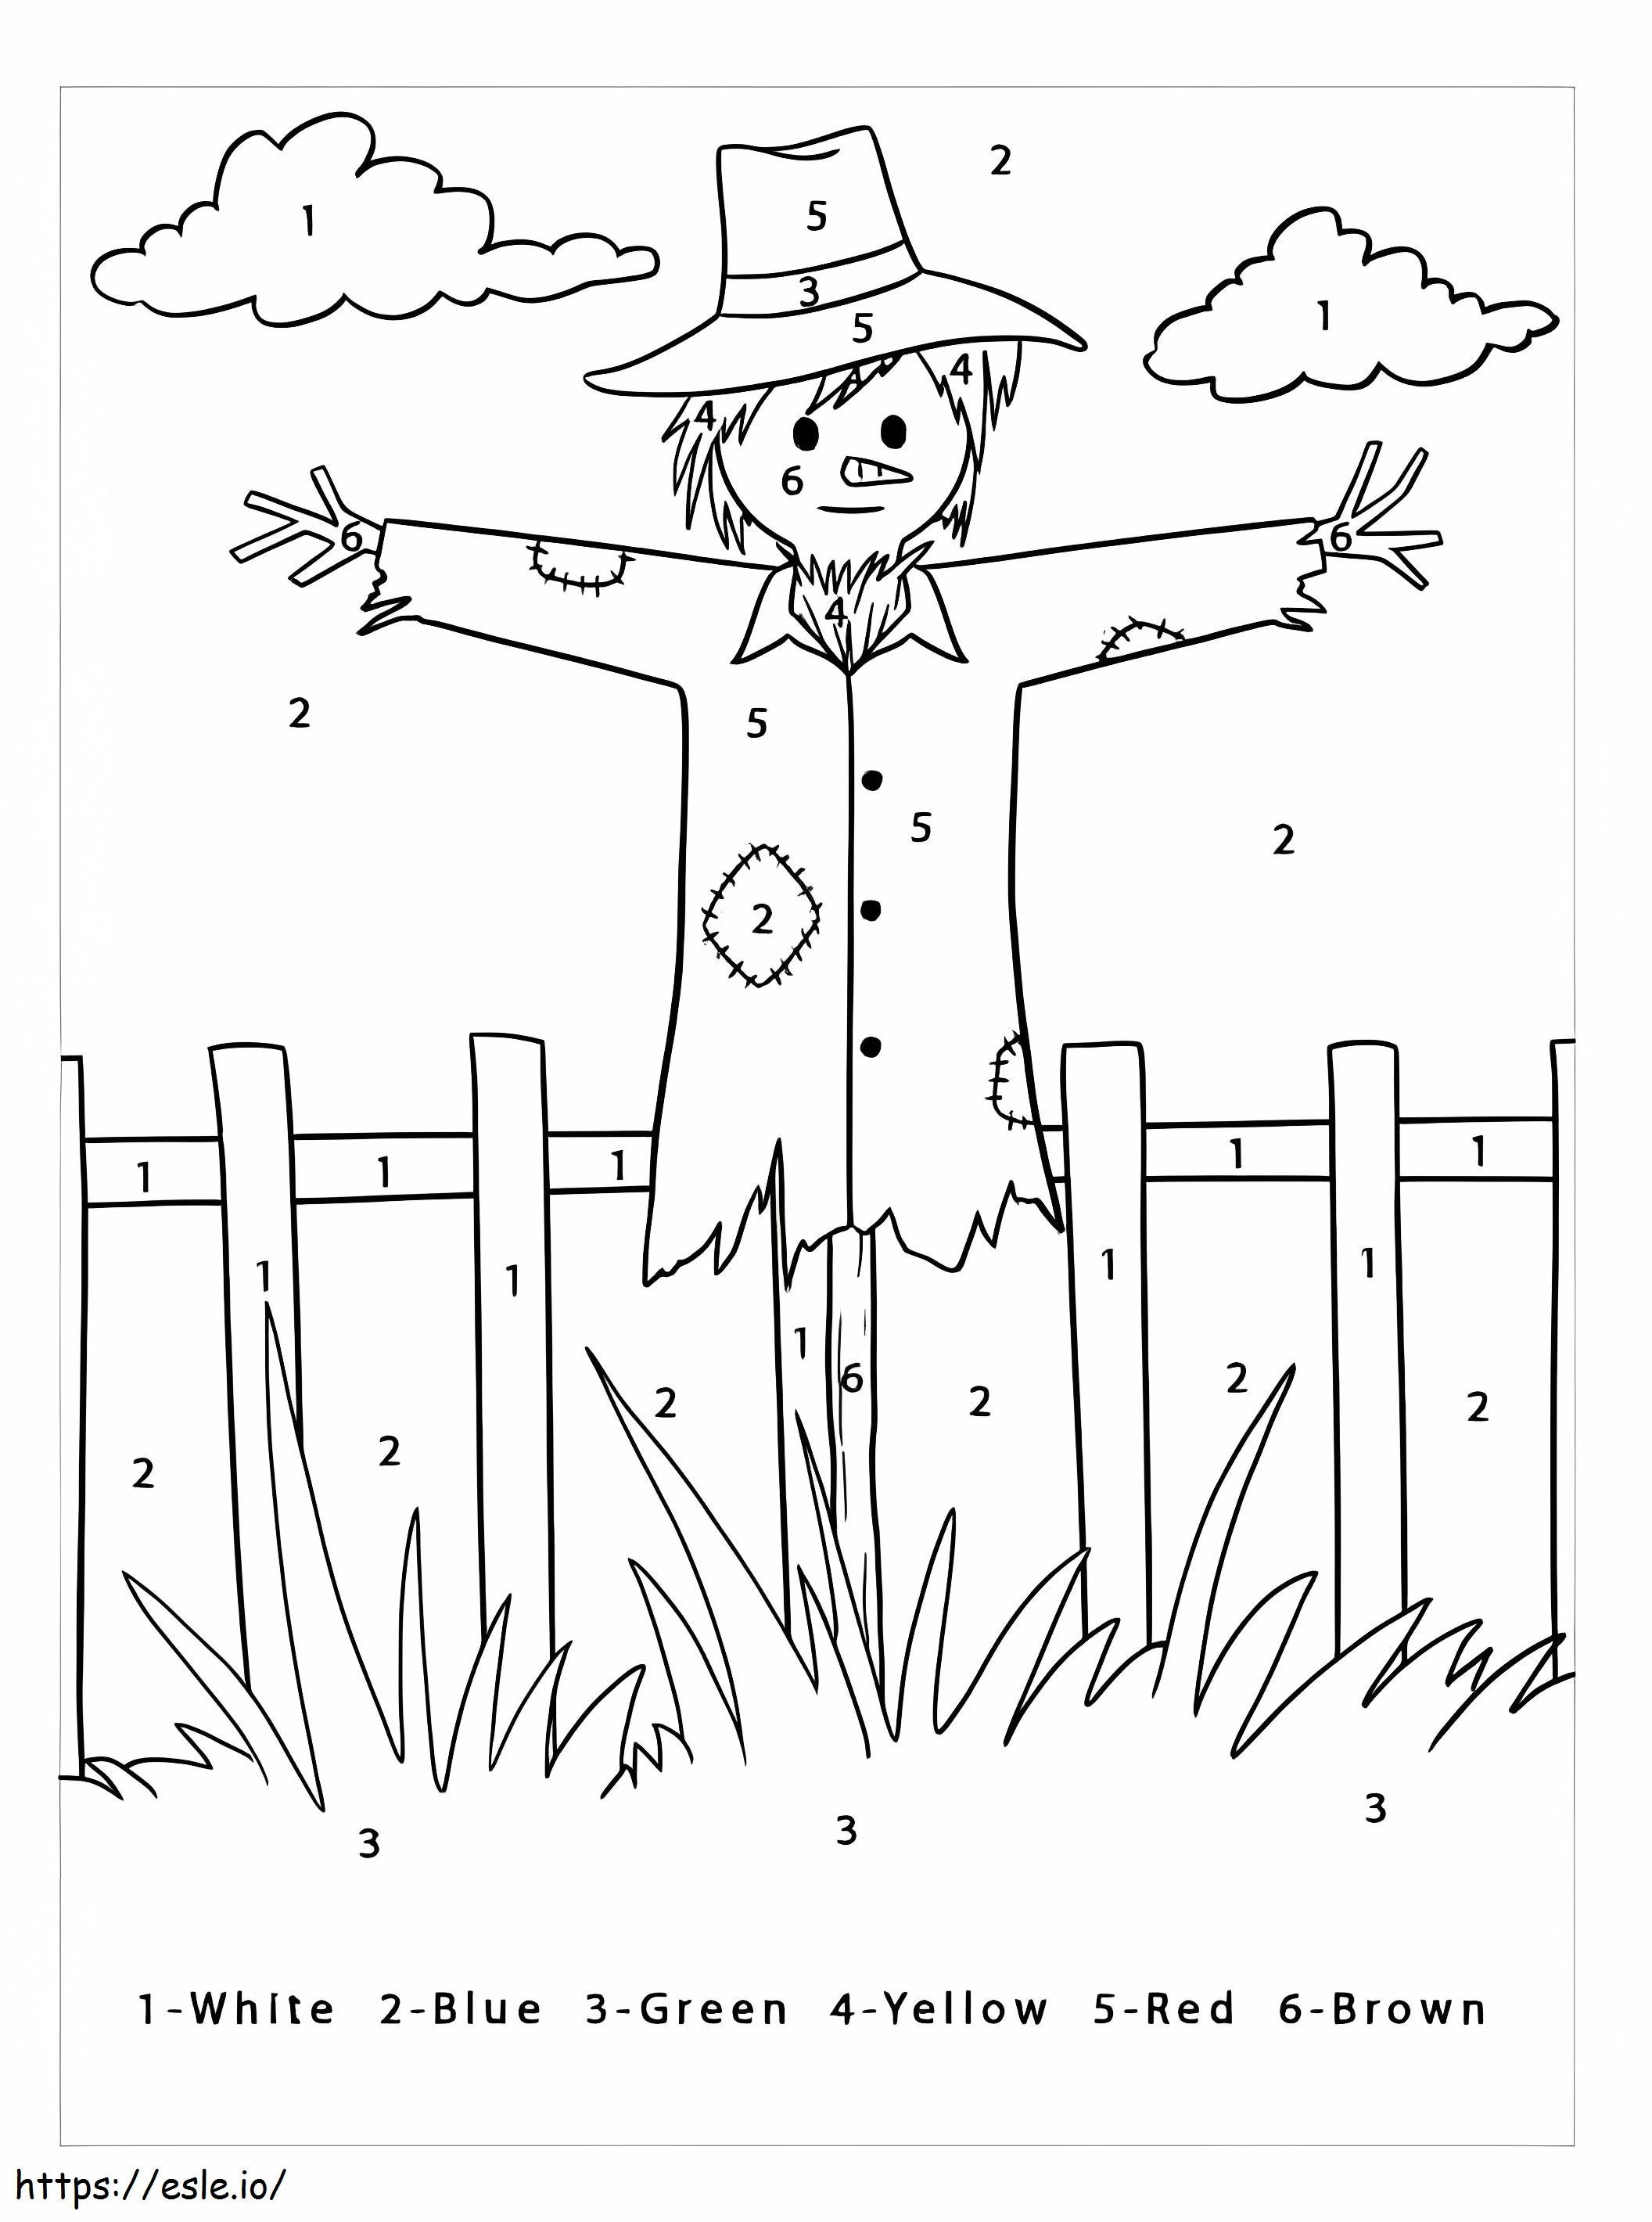 Nice Scarecrow coloring page